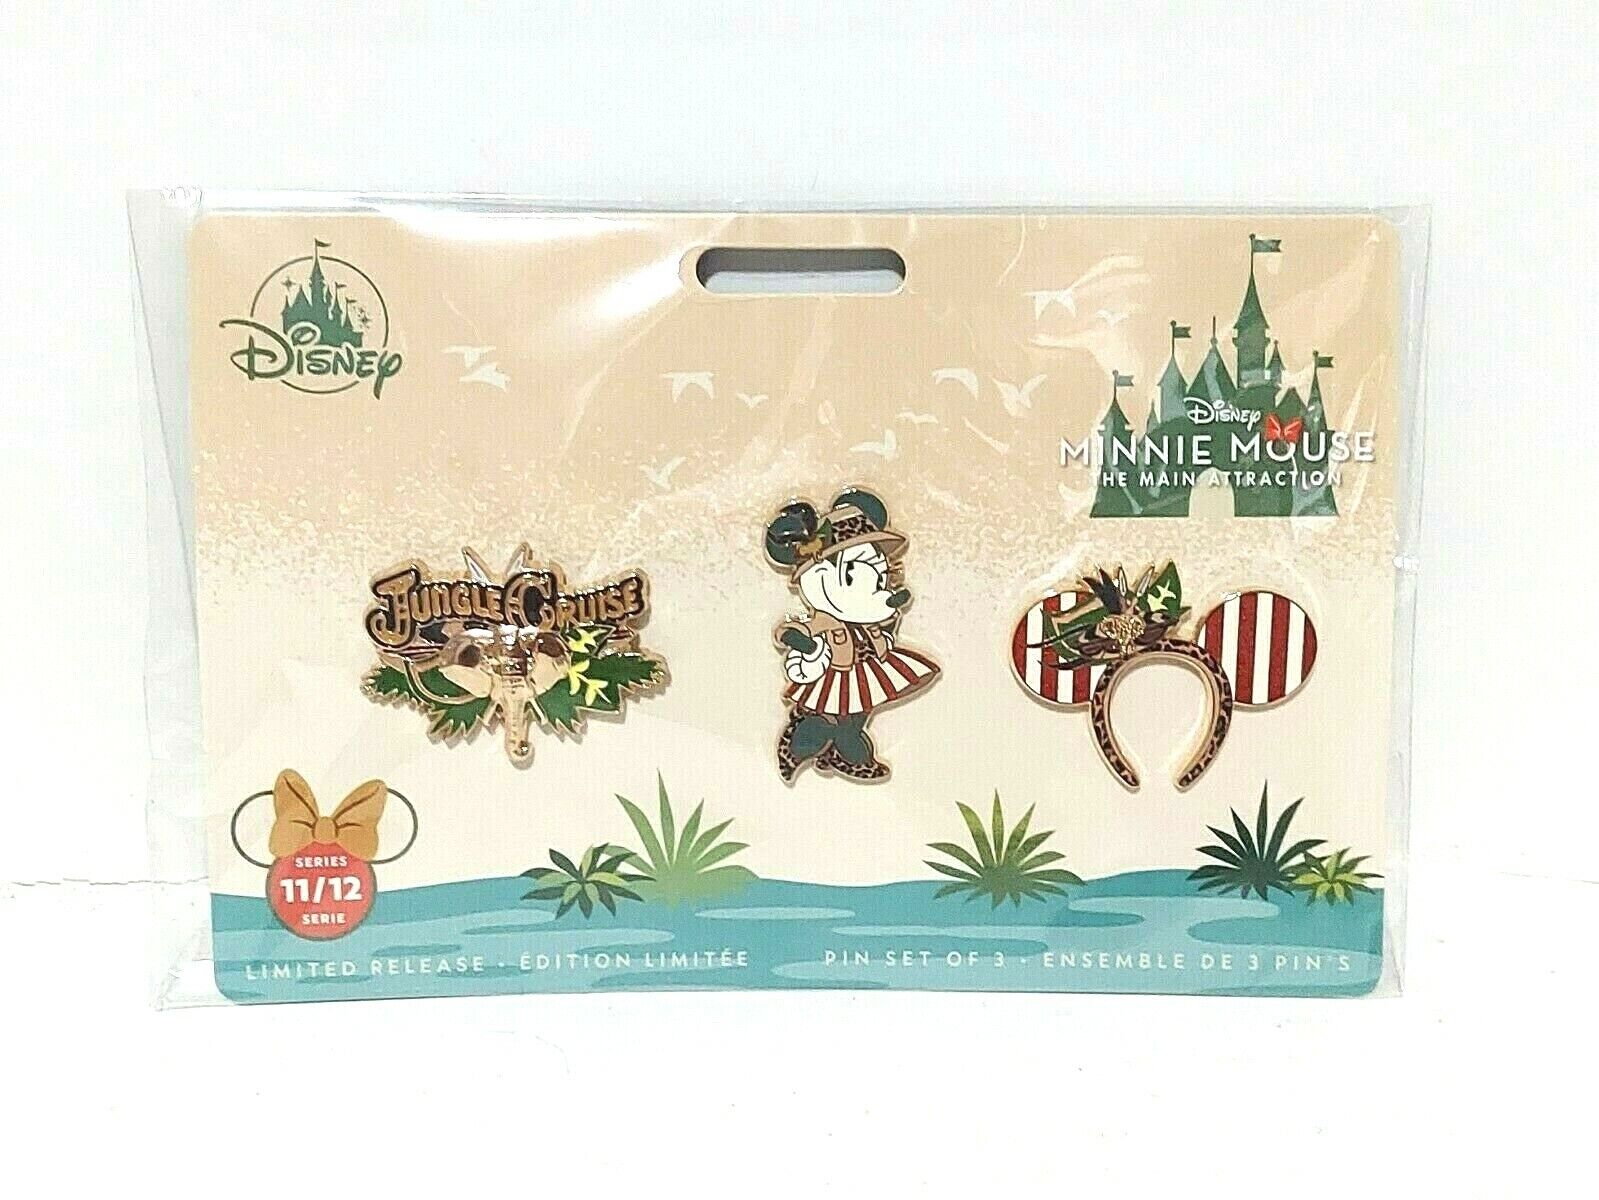 Minnie Mouse Main Attraction The Jungle Cruise Disney November 3 Pin Set LE #11